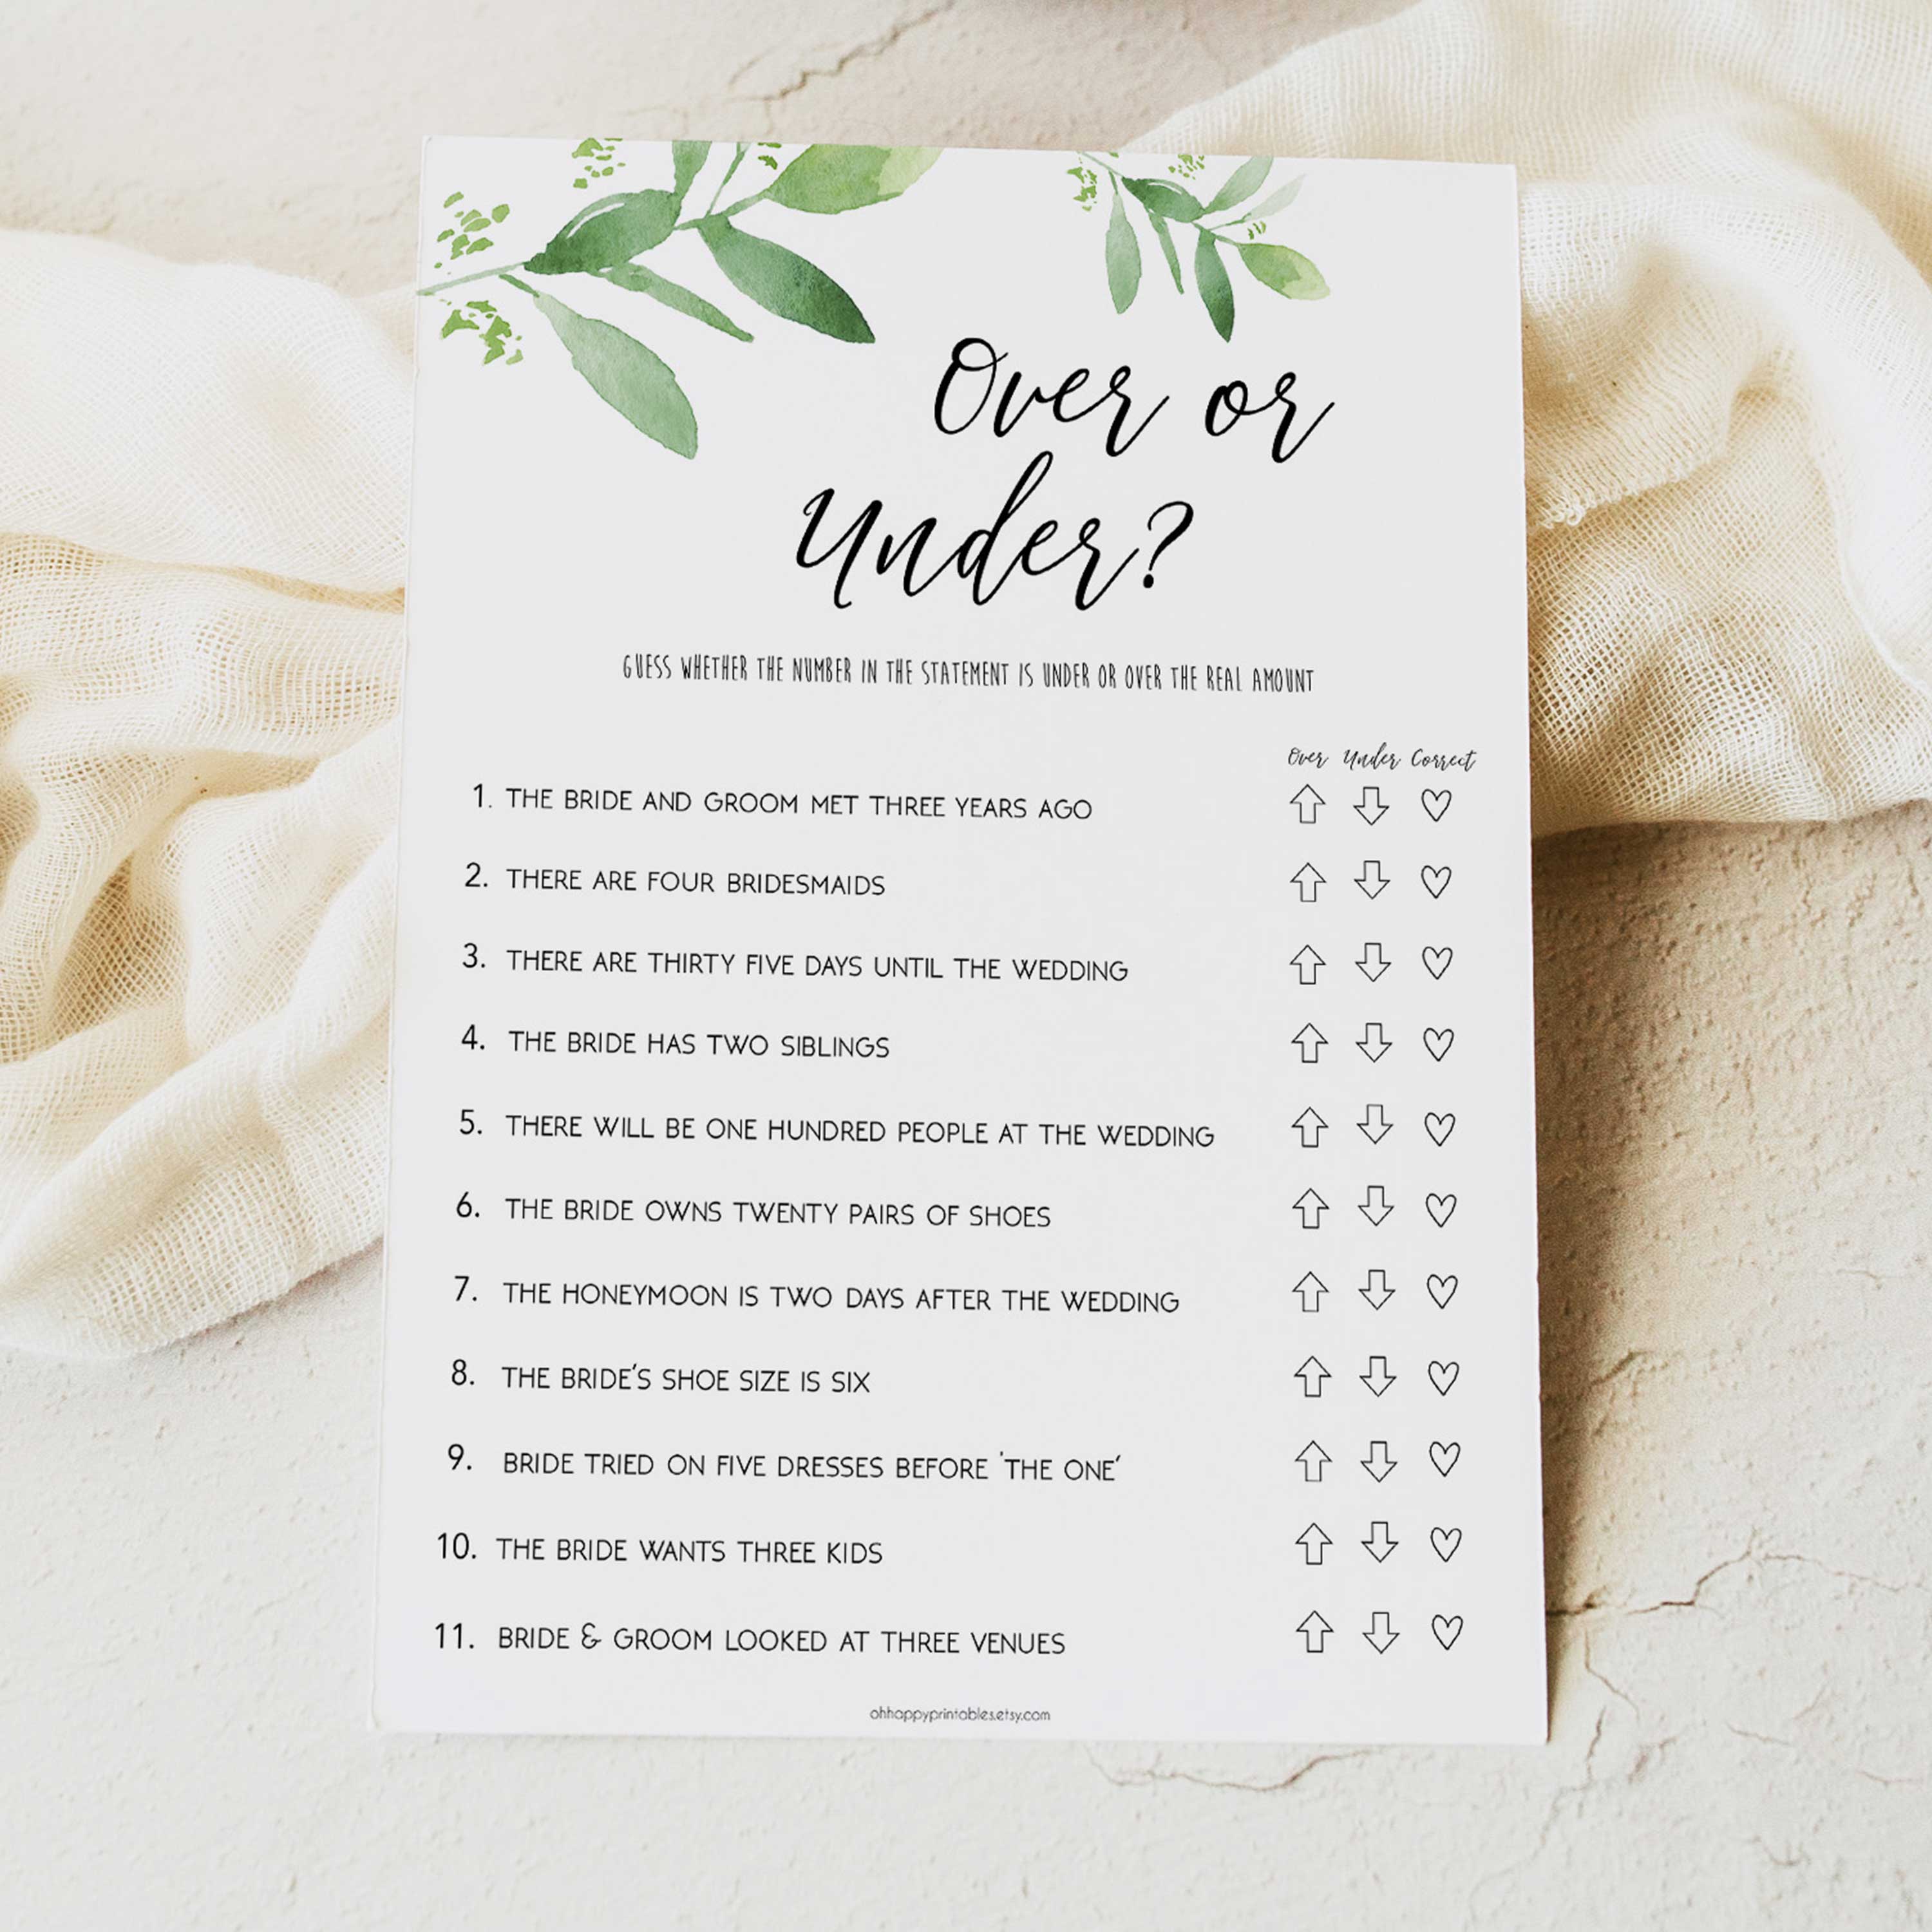 over or under game, greenery bridal shower, fun bridal shower games, bachelorette party games, floral bridal games, hen party ideas